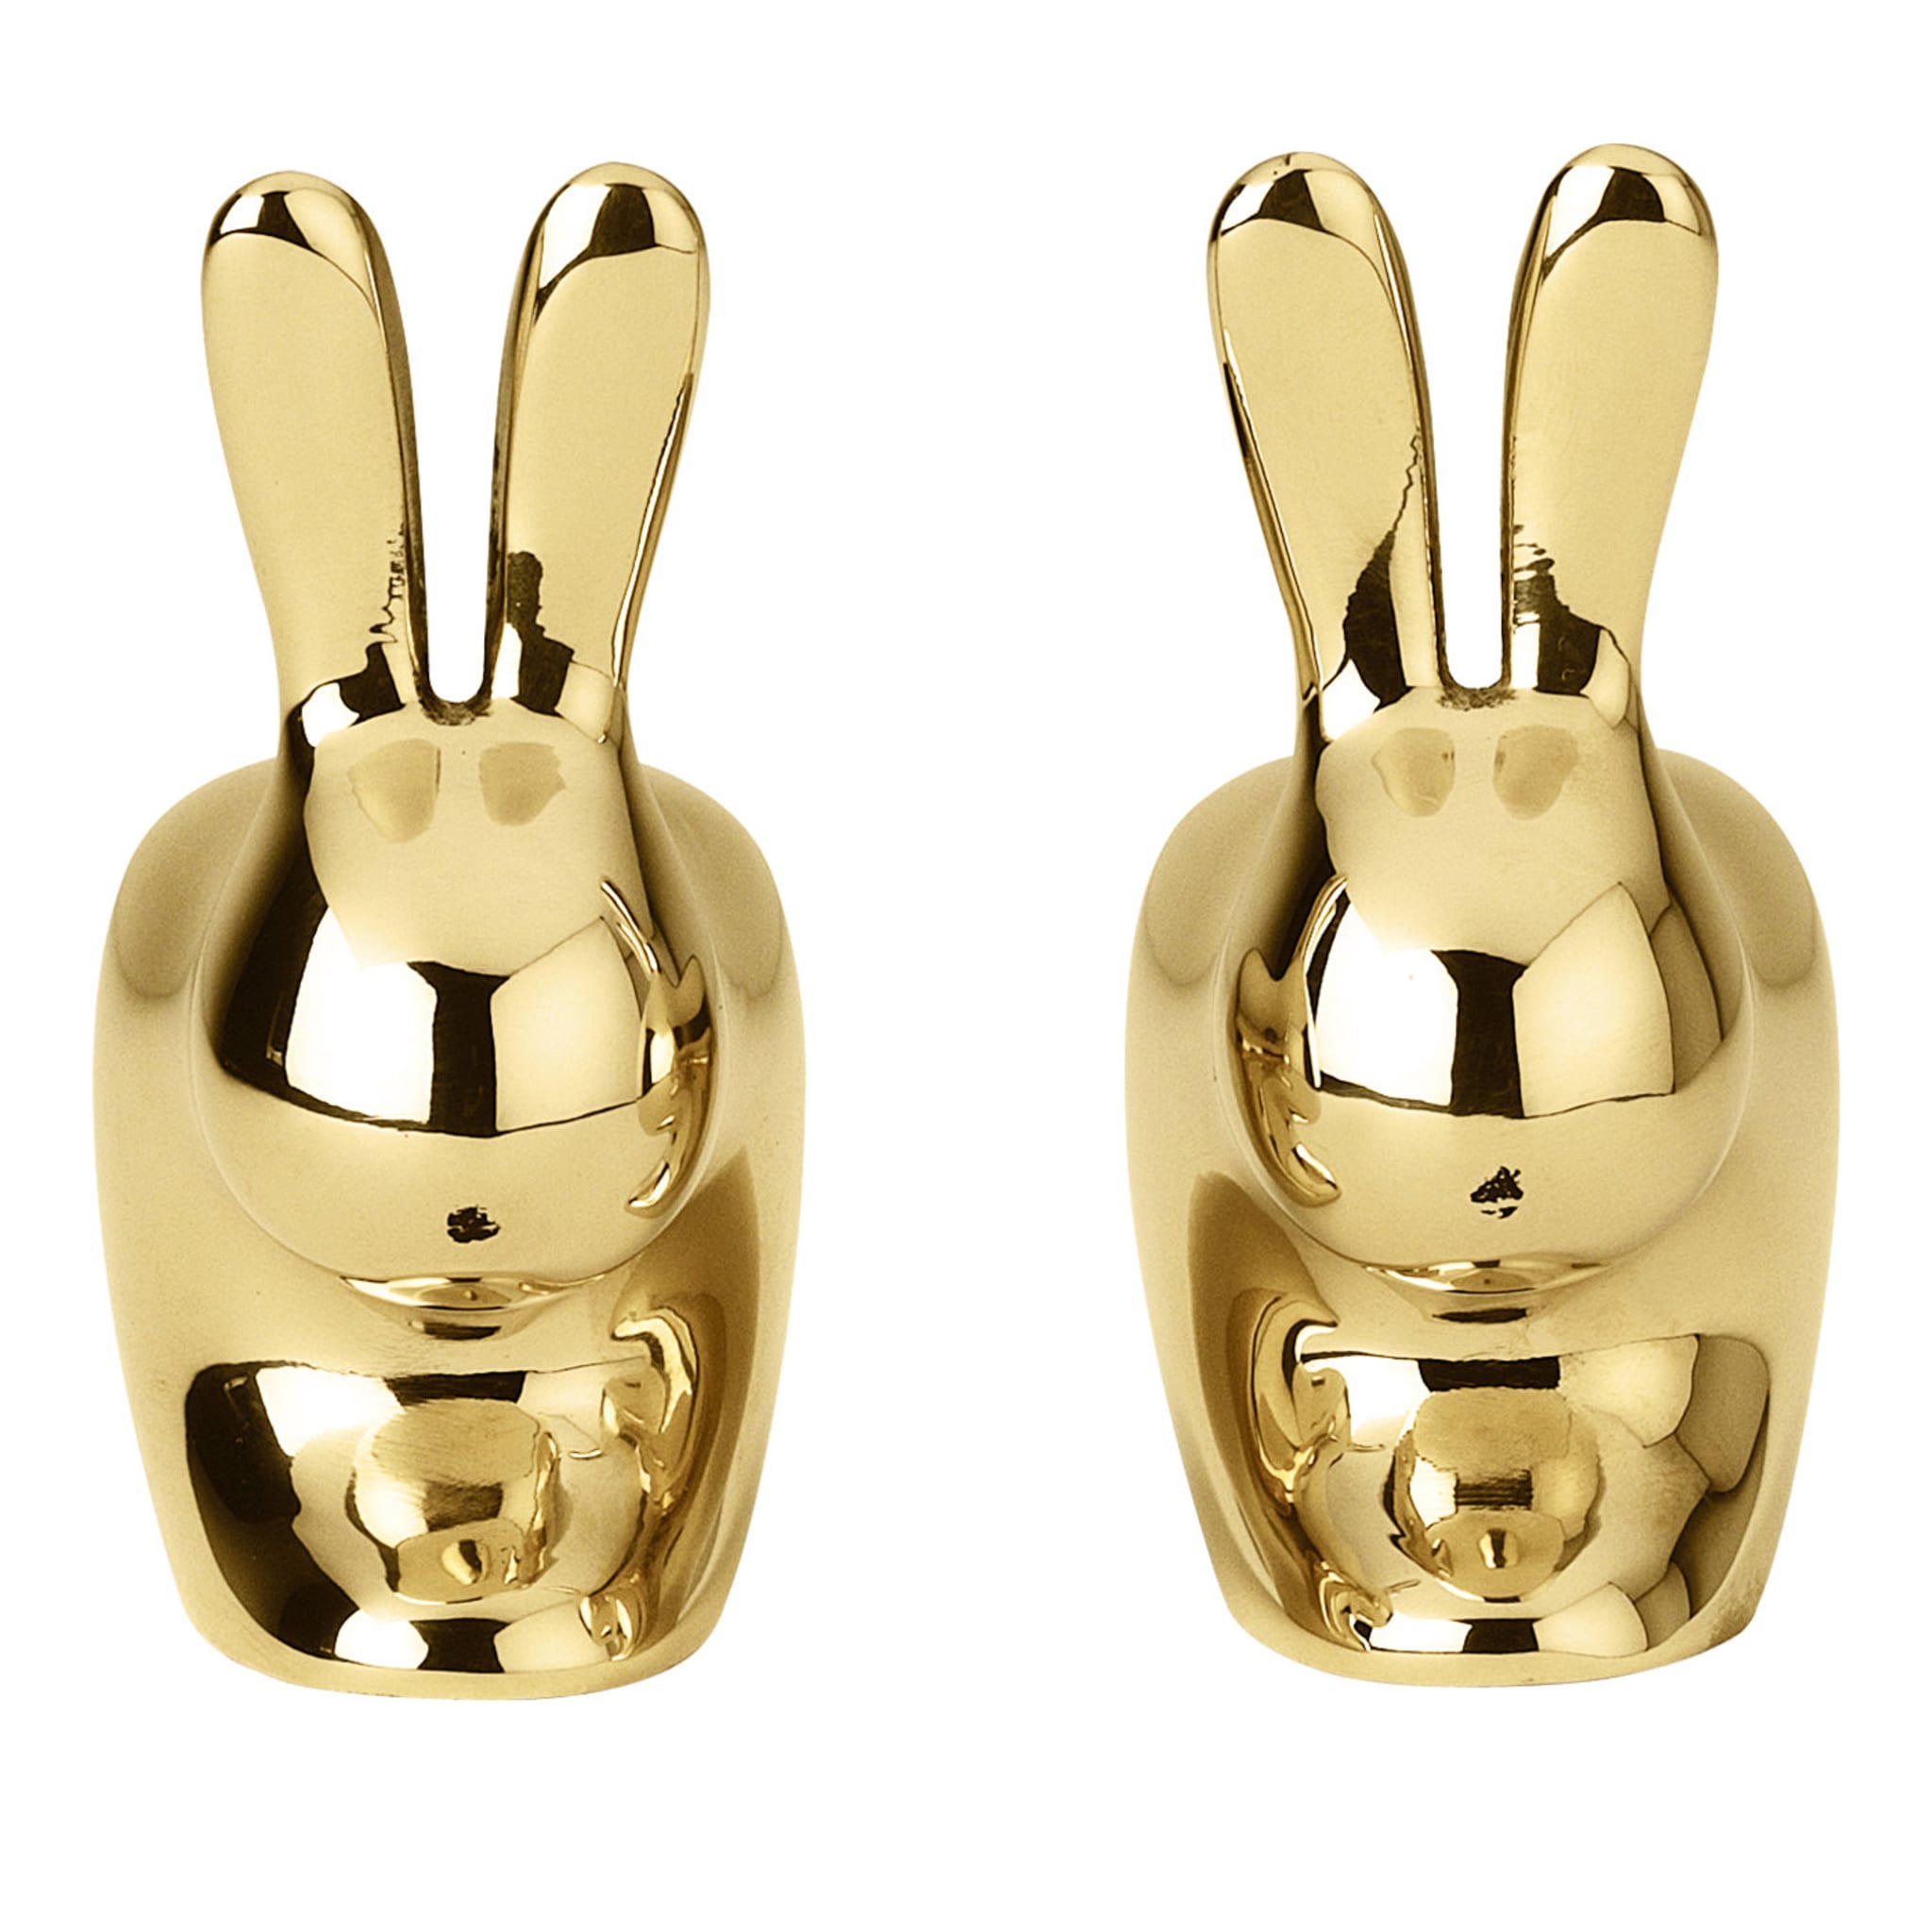 Rabbit Salt and Pepper Shaker in Brass Finish By Stefano Giovannoni - Main view